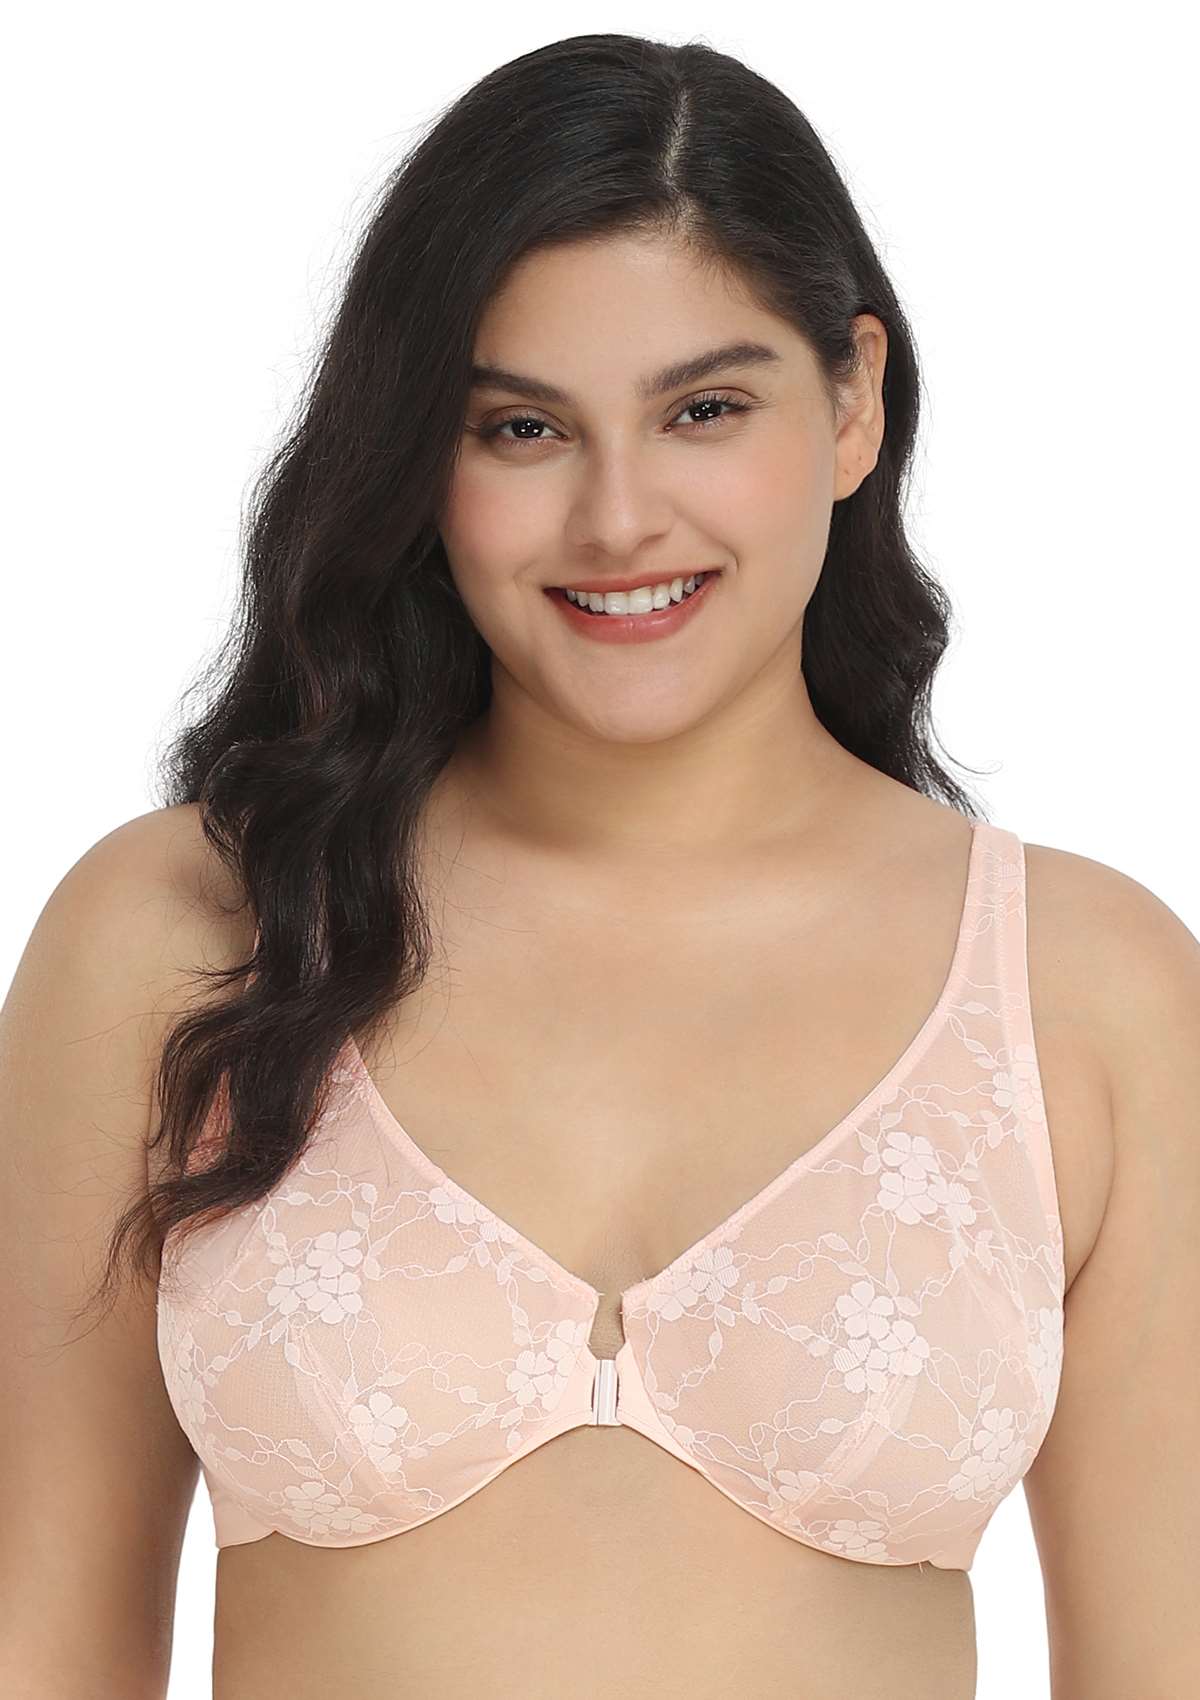 HSIA Spring Romance Front-Close Floral Lace Unlined Full Coverage Bra - White / 36 / C